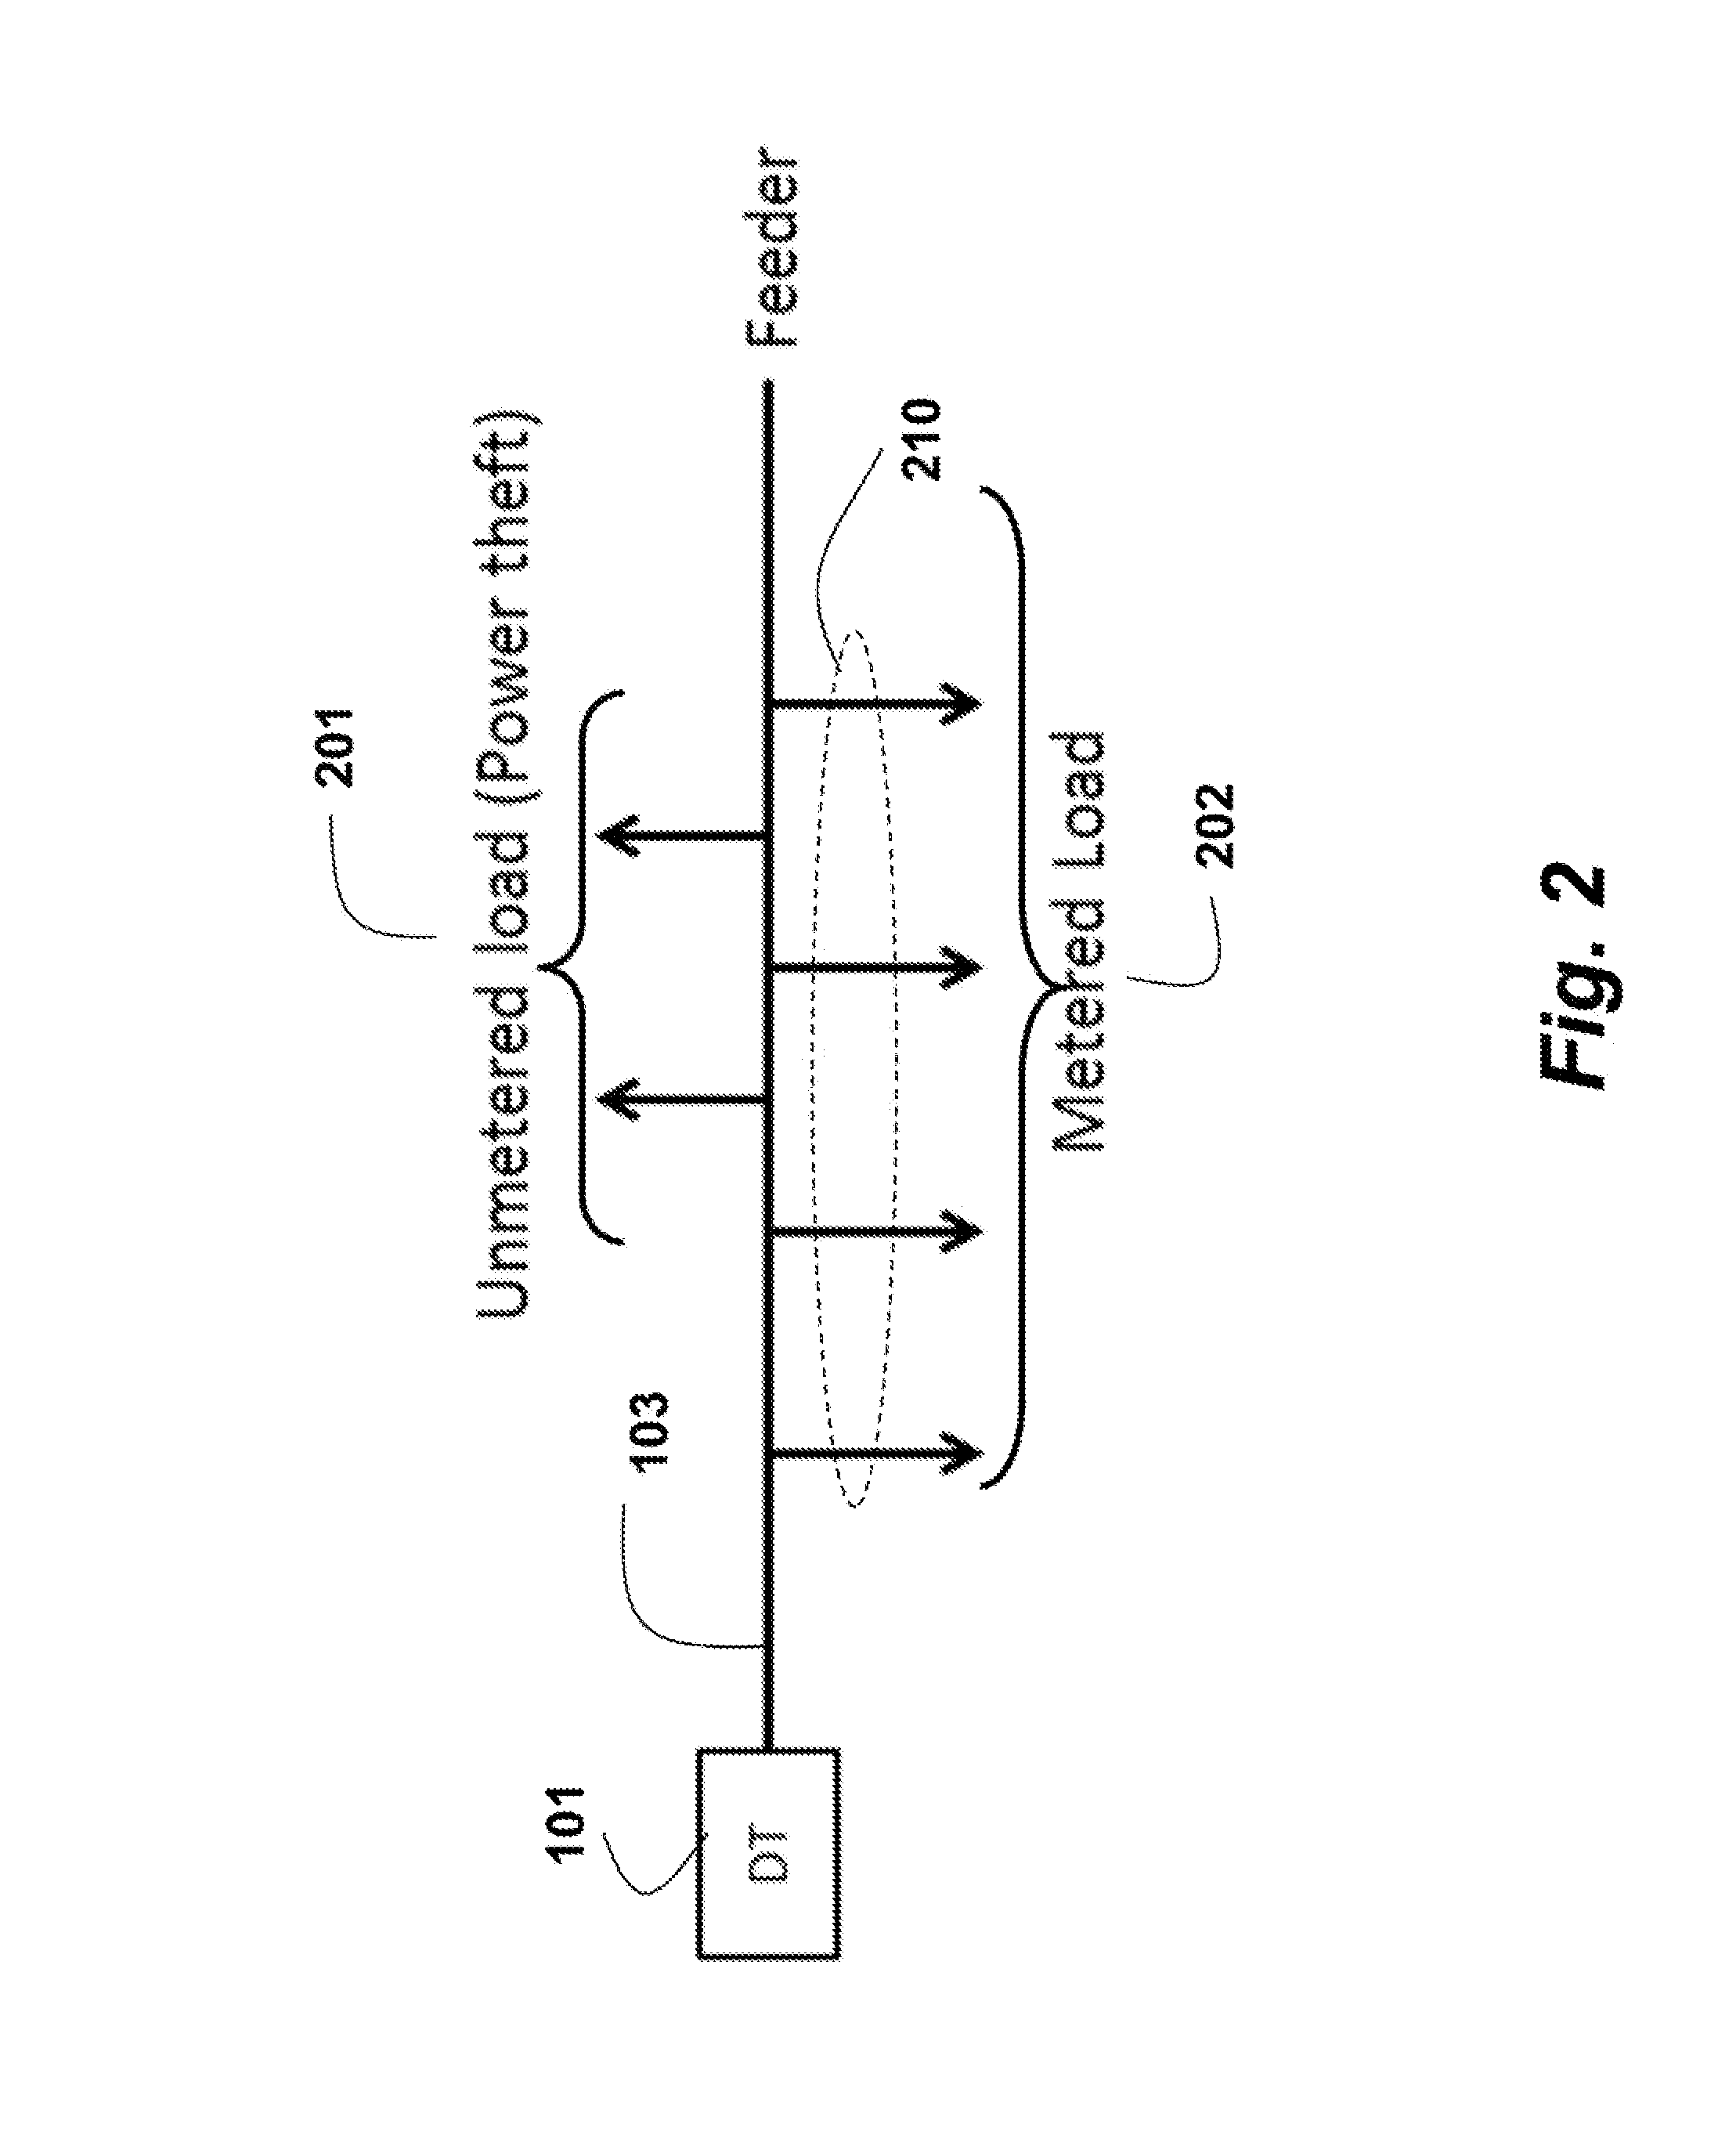 Method for Detecting Power Theft in a Power Distribution System